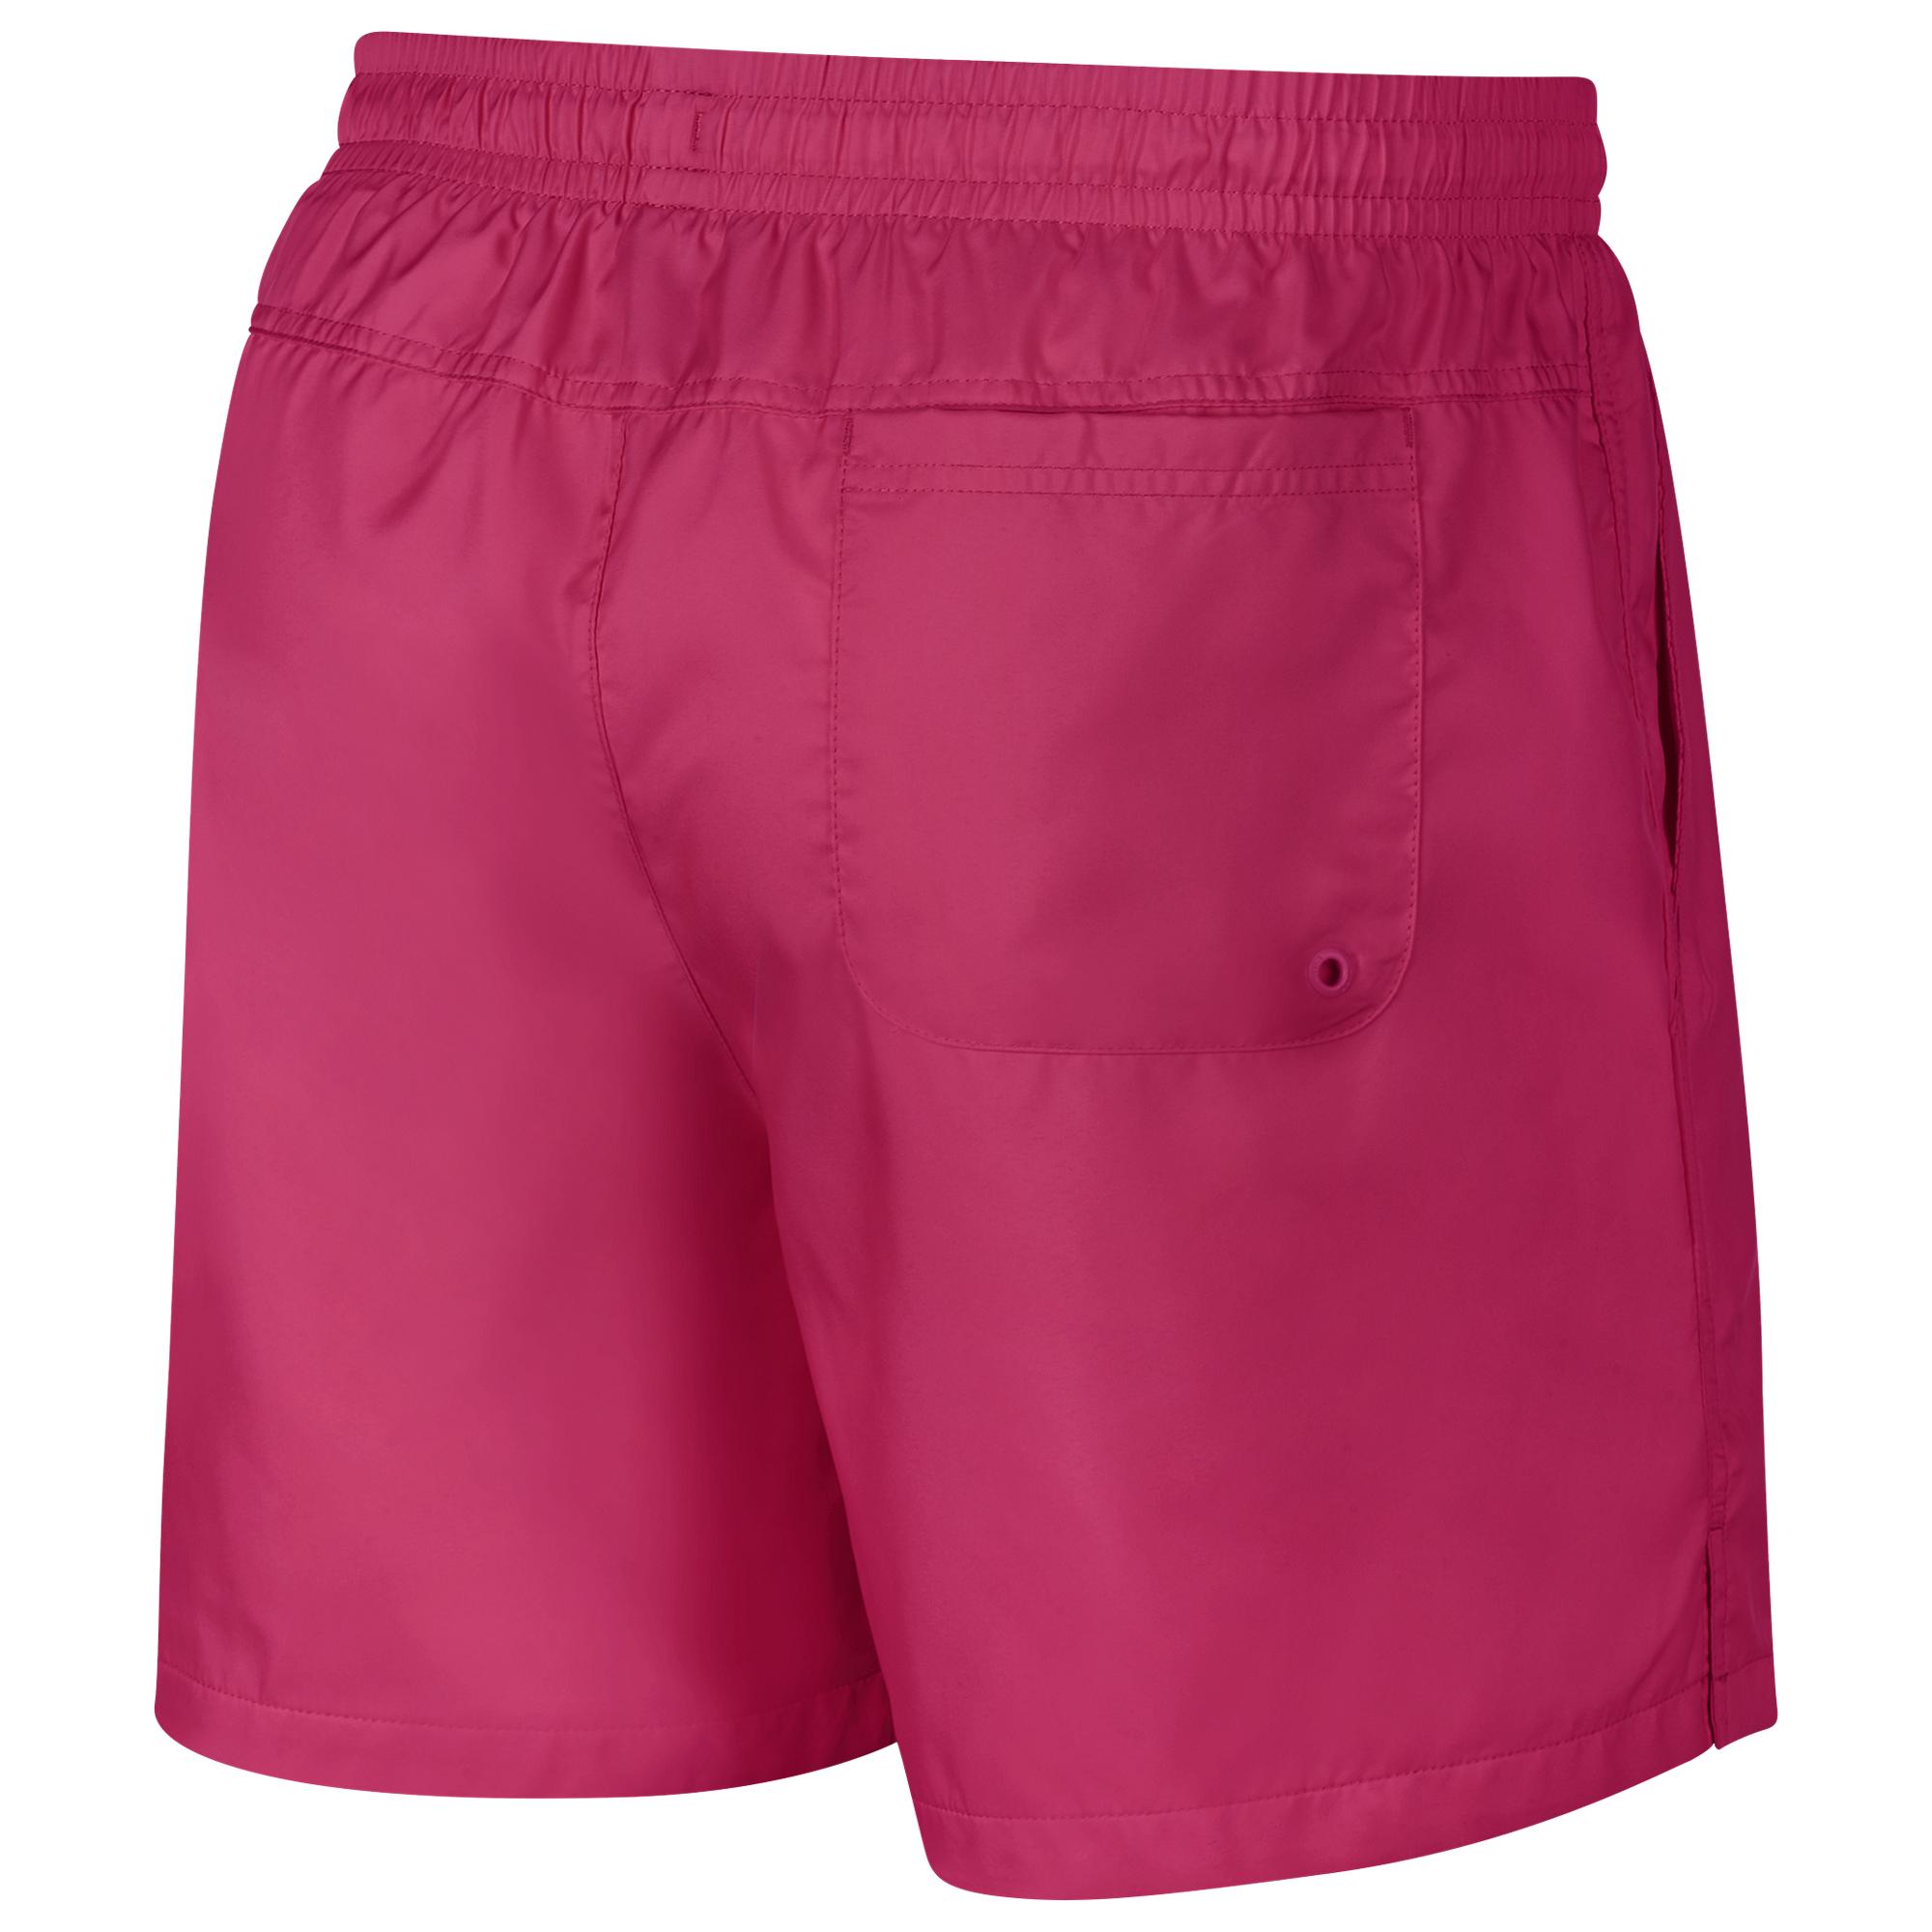 nike club essentials woven flow shorts pink